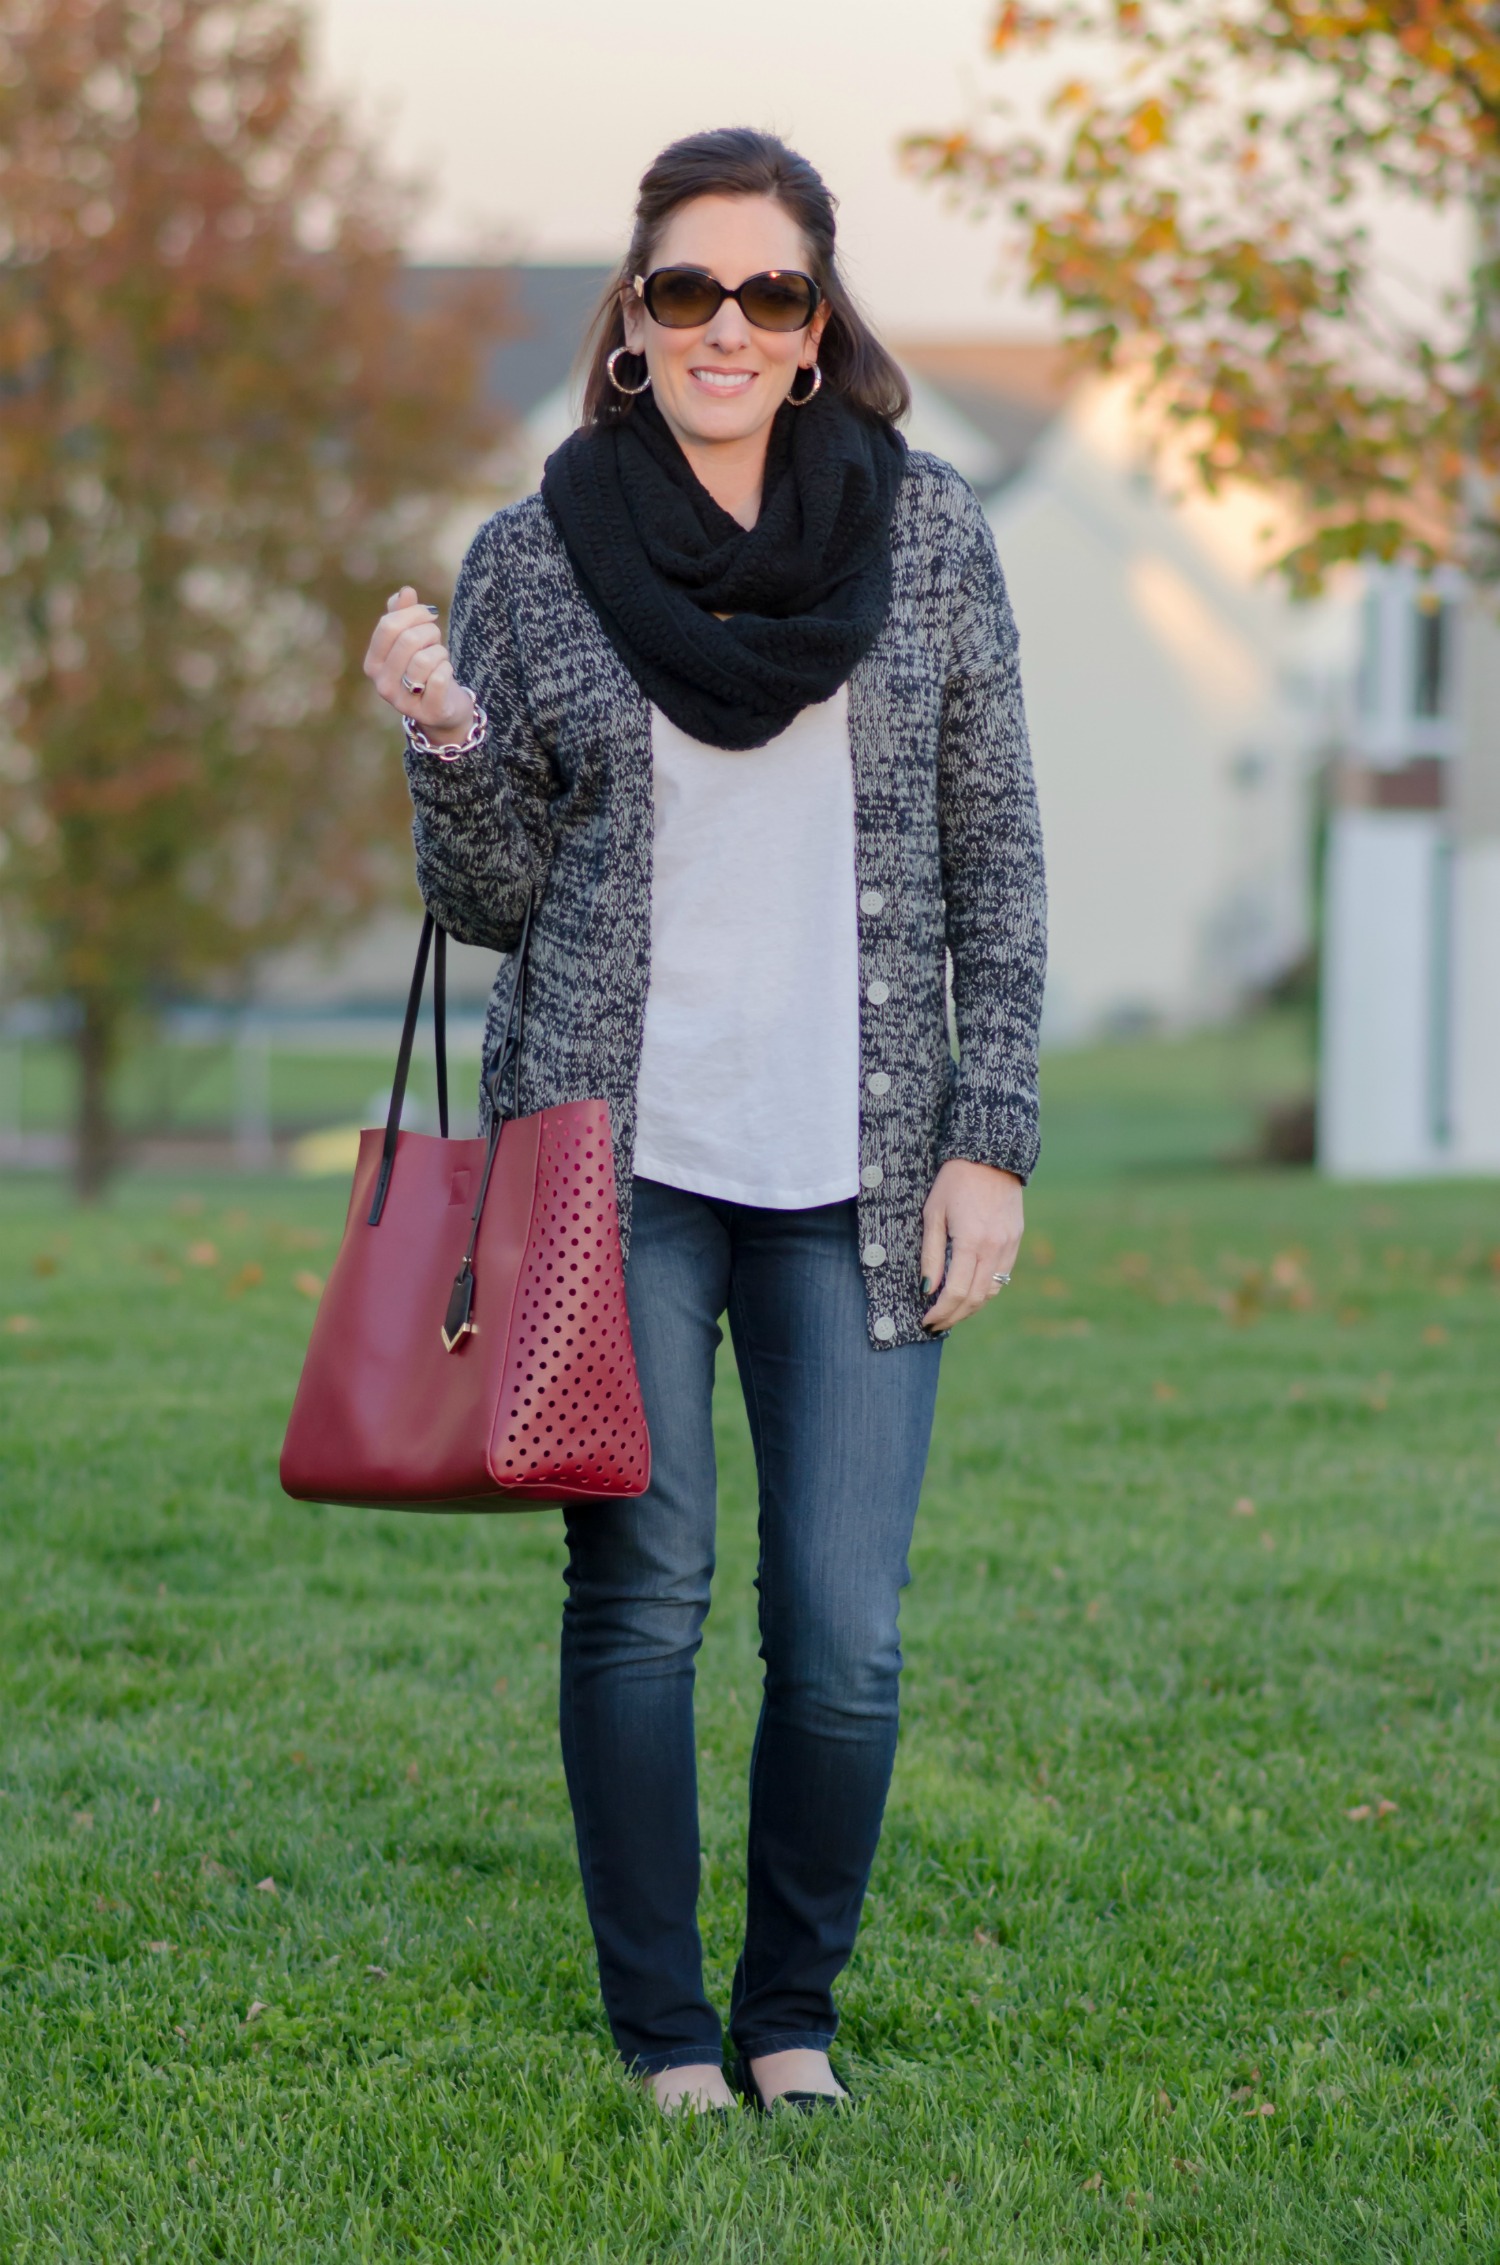 What I Wore: Marled Cardigan over a White Tee with Skinnies